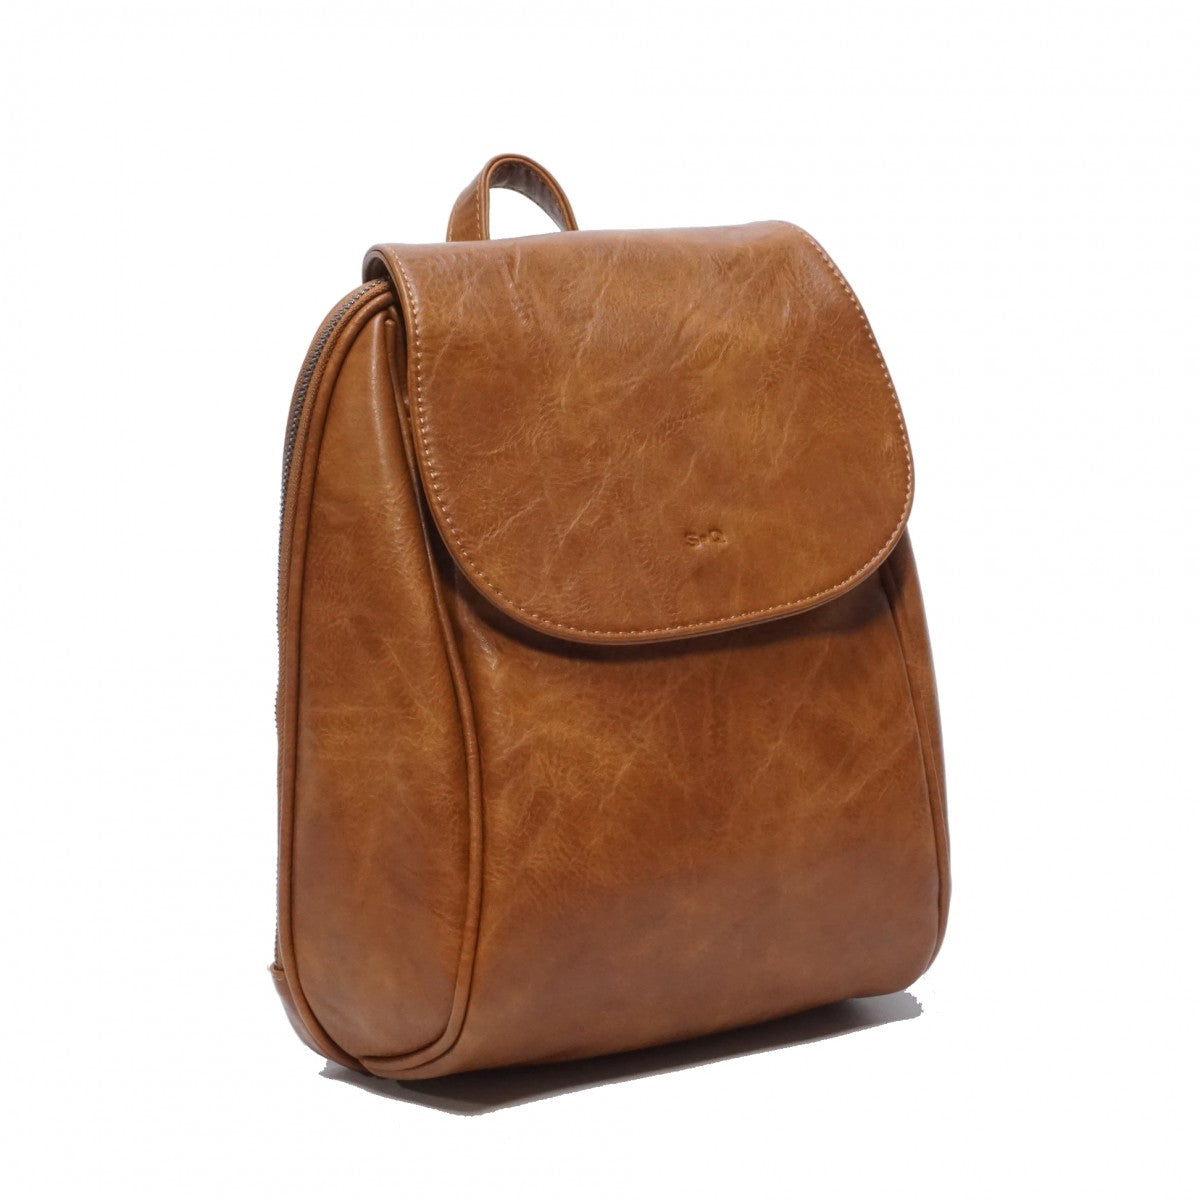 S-Q JADA CONVERTIBLE BACKPACK IN CAMEL